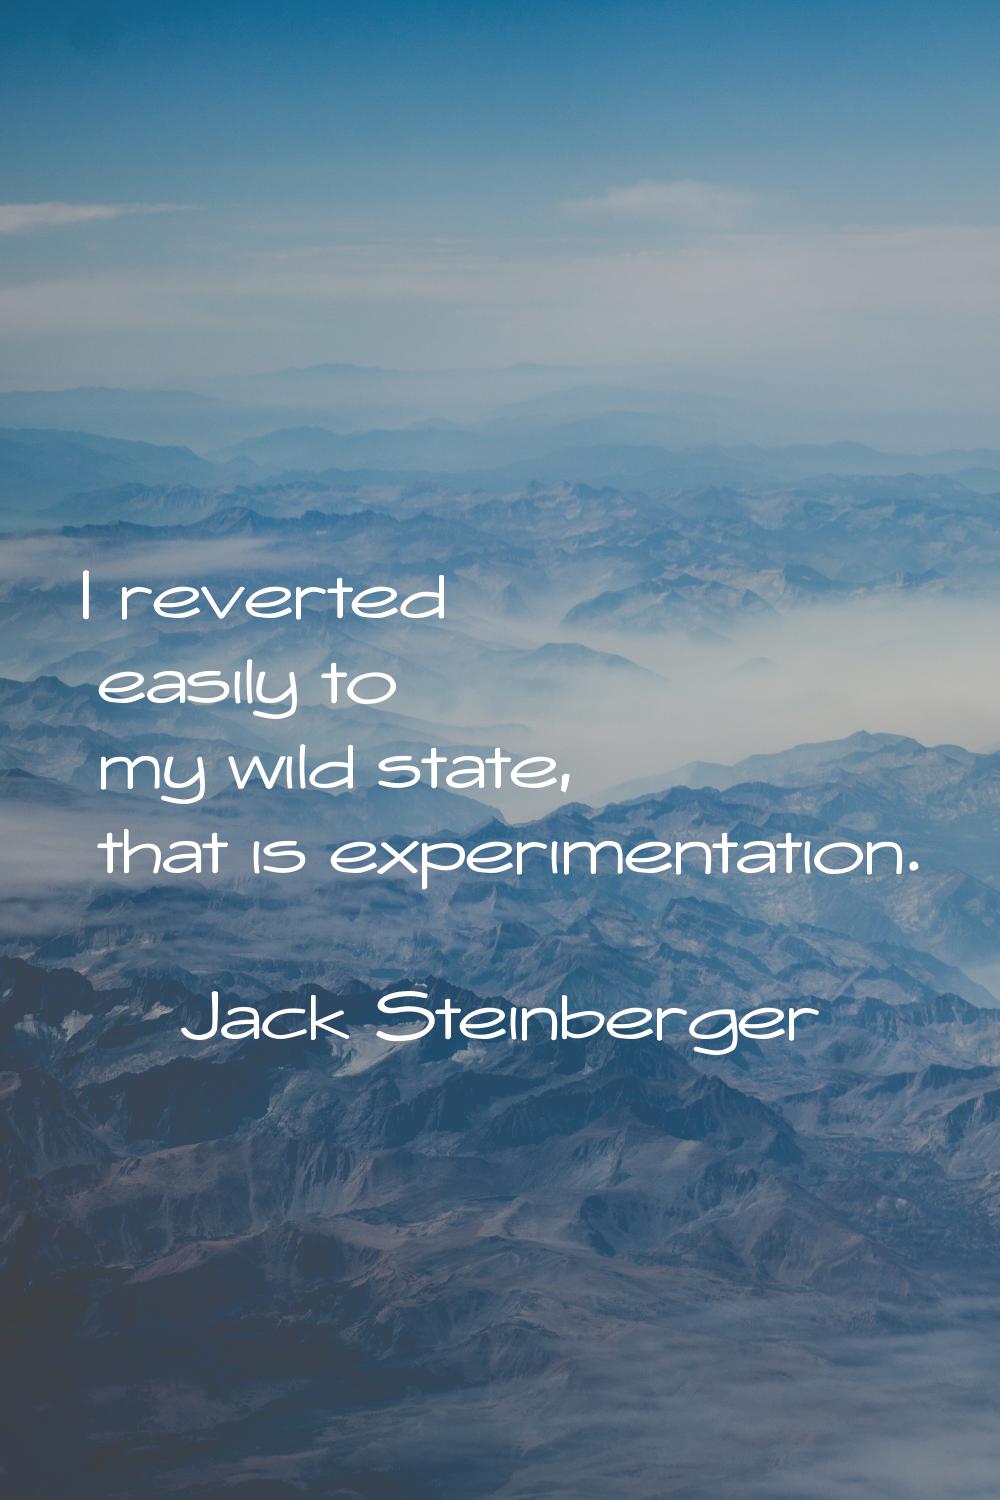 I reverted easily to my wild state, that is experimentation.